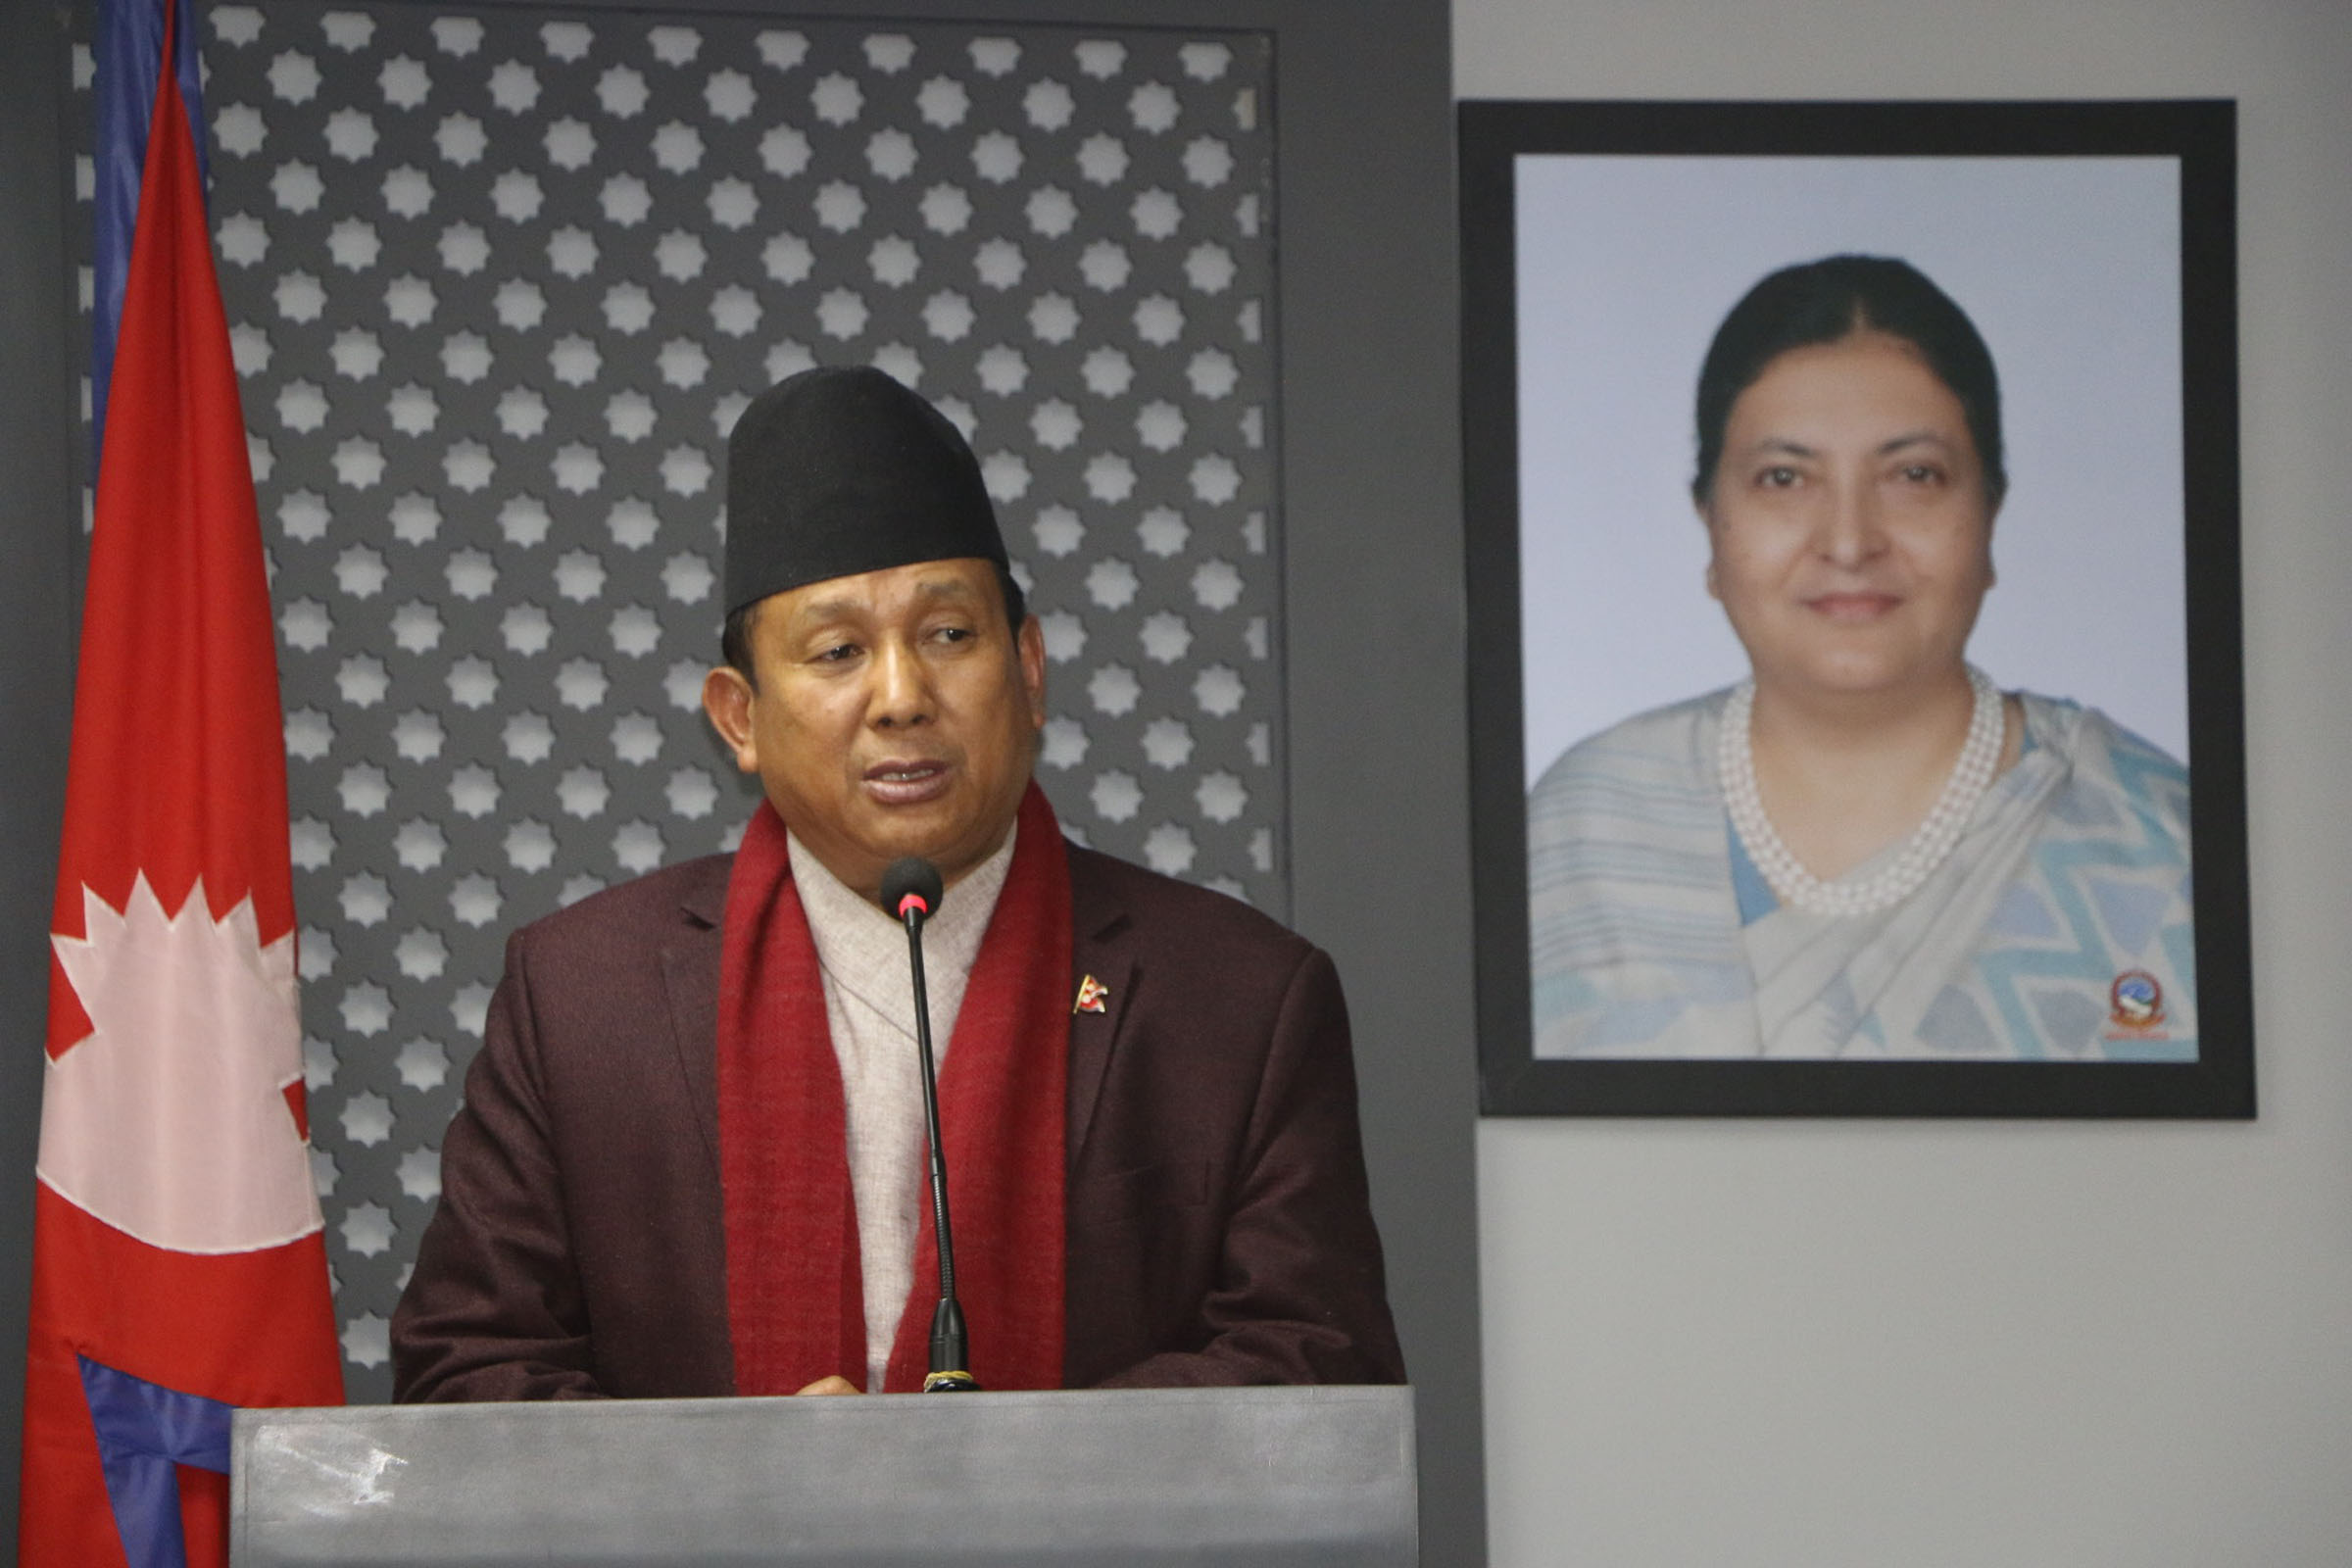 Declaration of elections cannot be unconstitutional: Minister Gurung